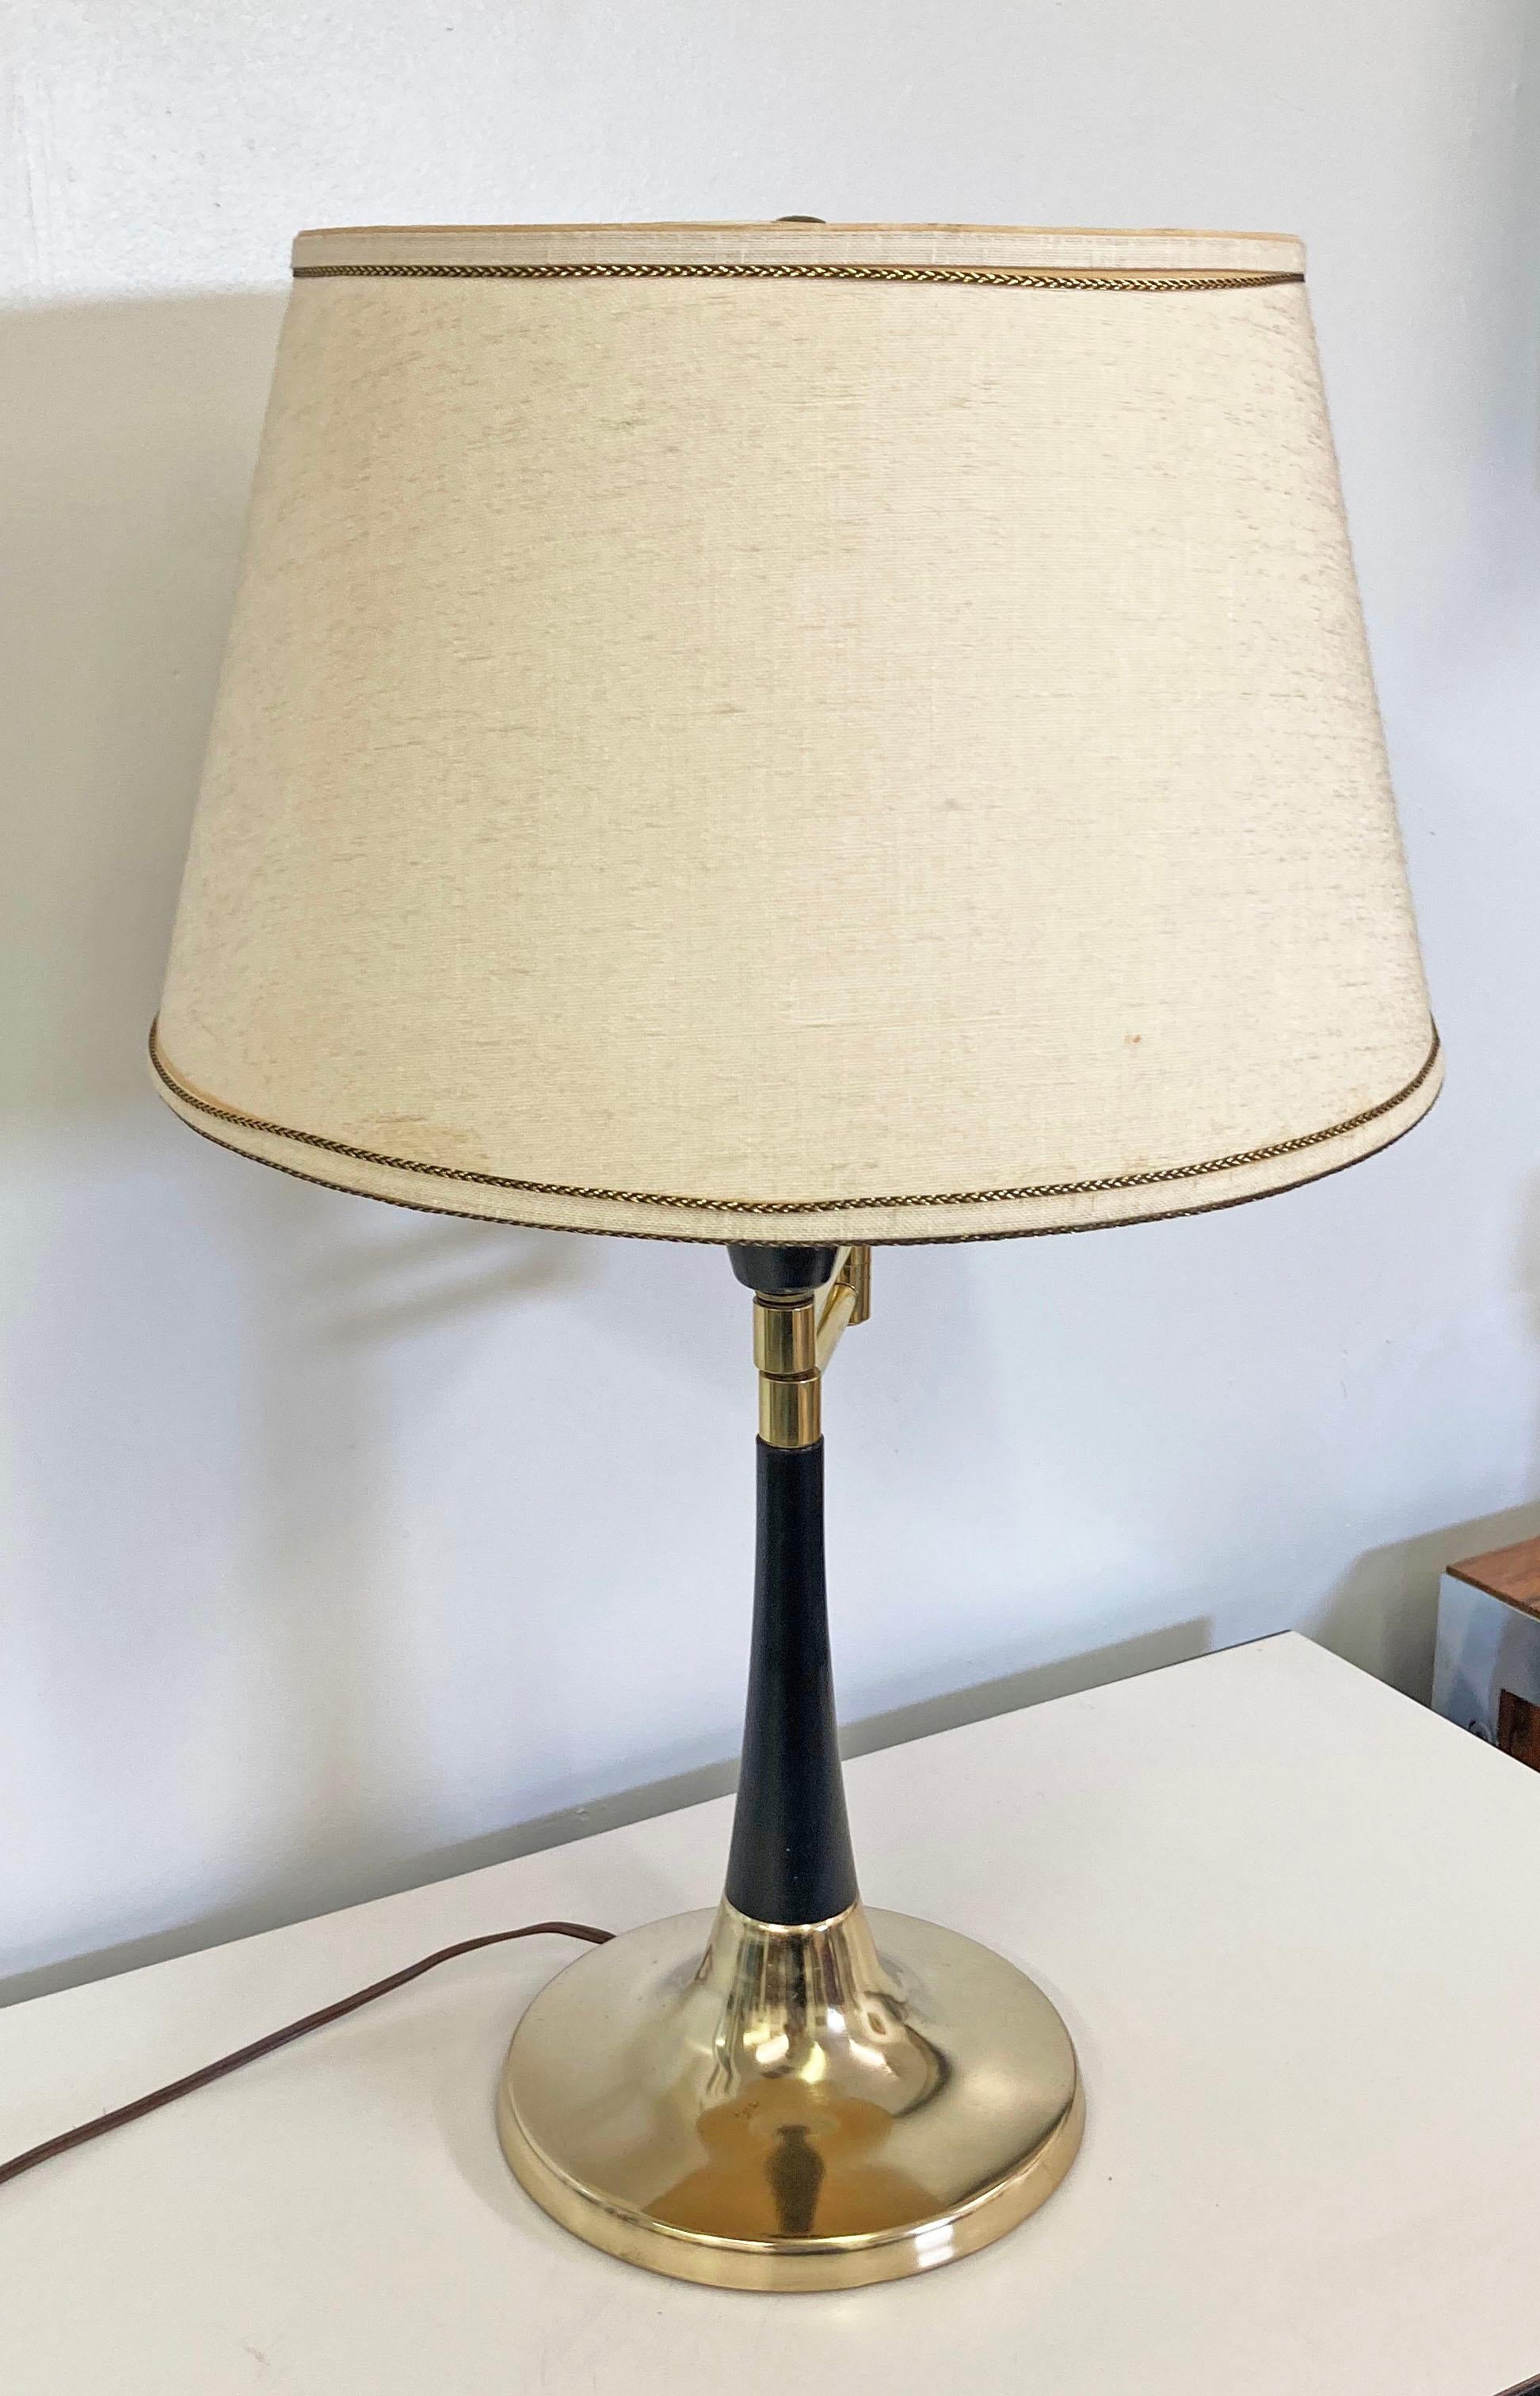 Offered is a vintage Mid-Century Modern table lamp, featuring a brass base with a swing arm. Has a diffuser attached as well. Lighting has been tested and is in working condition. In good condition with some age wear including surface wear/marks on